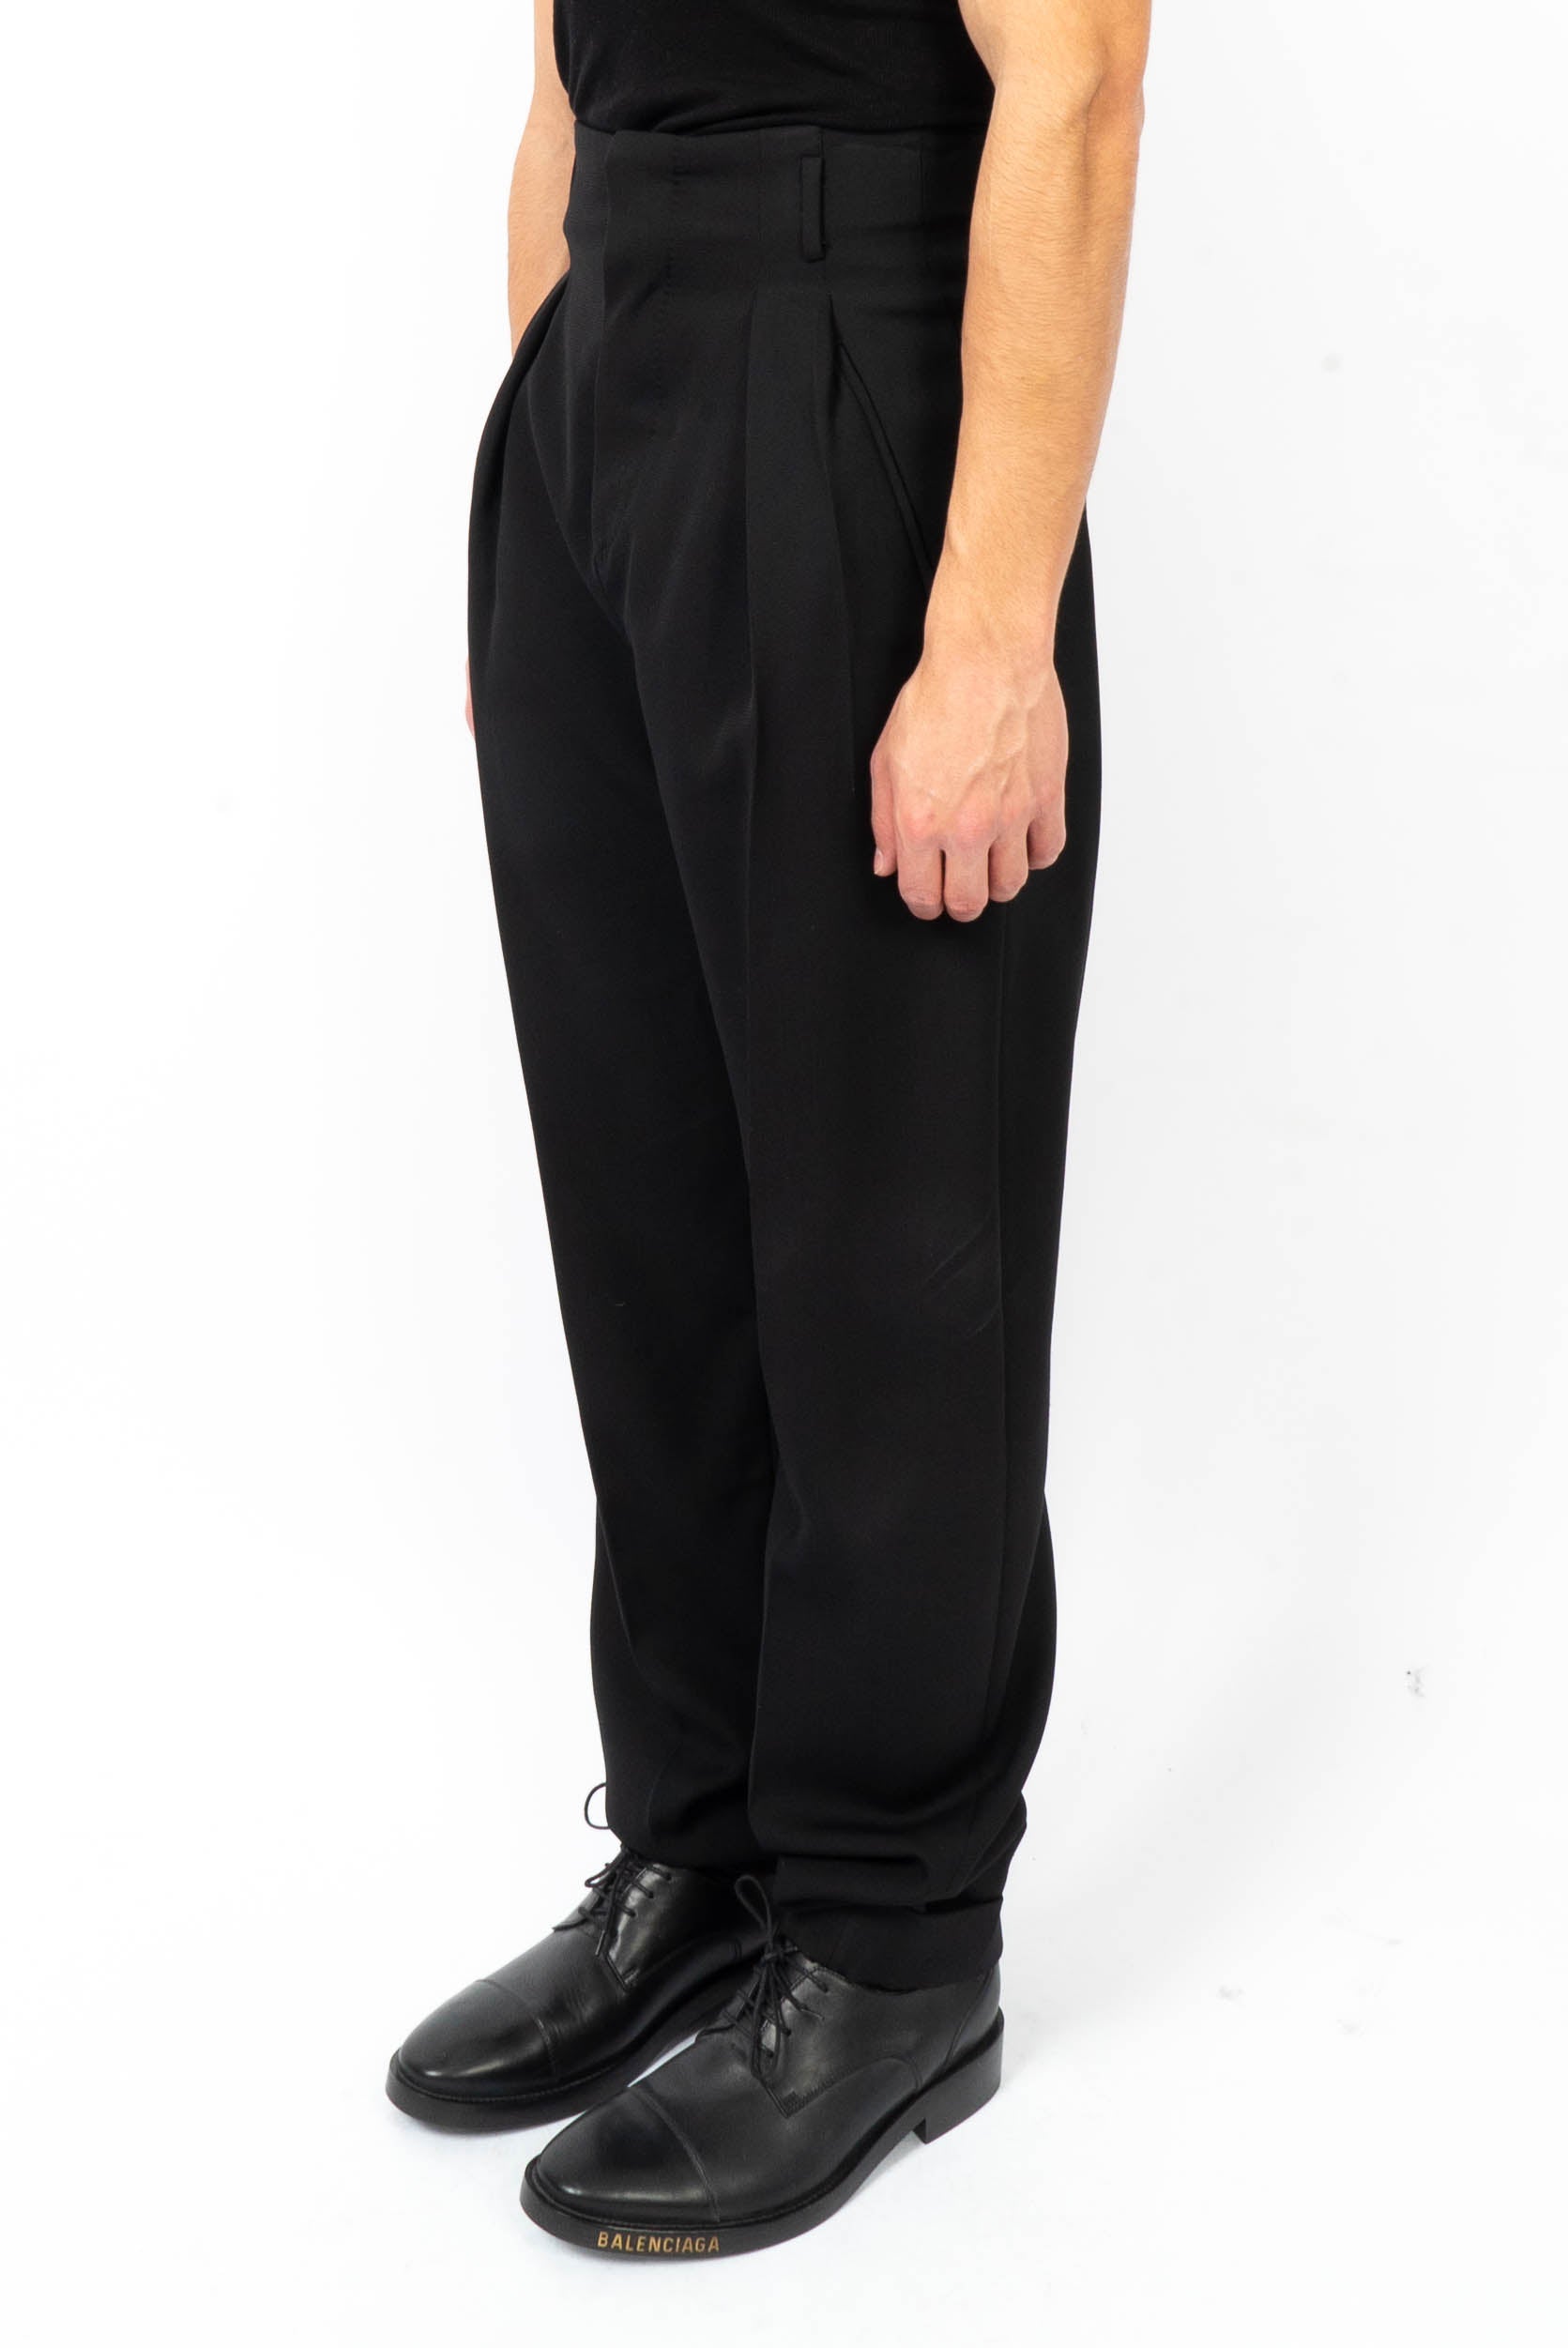 SS18 Black High Waisted Wool Trousers